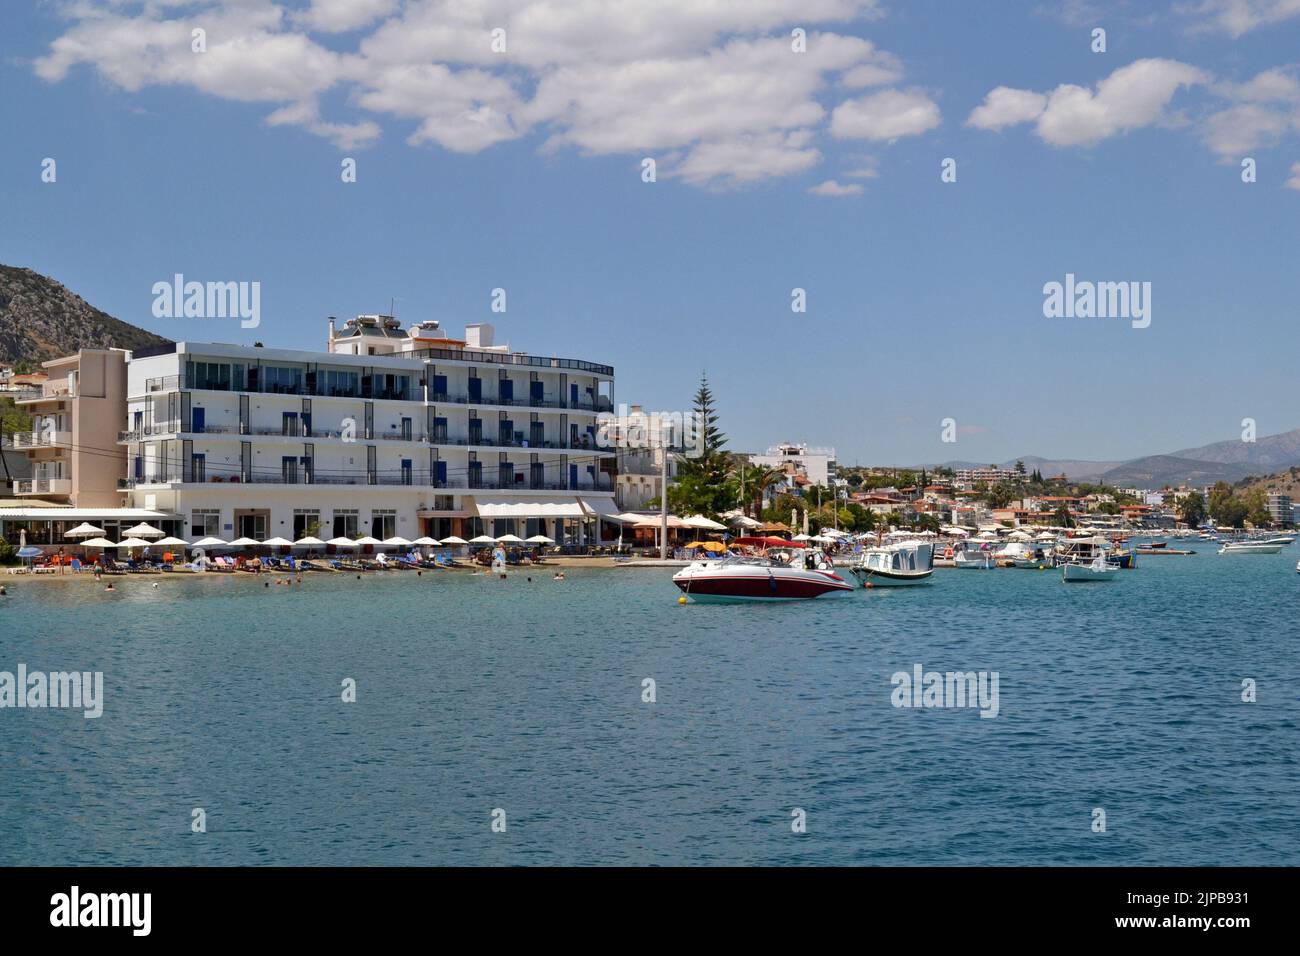 Tolo, a small village in Greece on the Peloponnese peninsula. Stock Photo